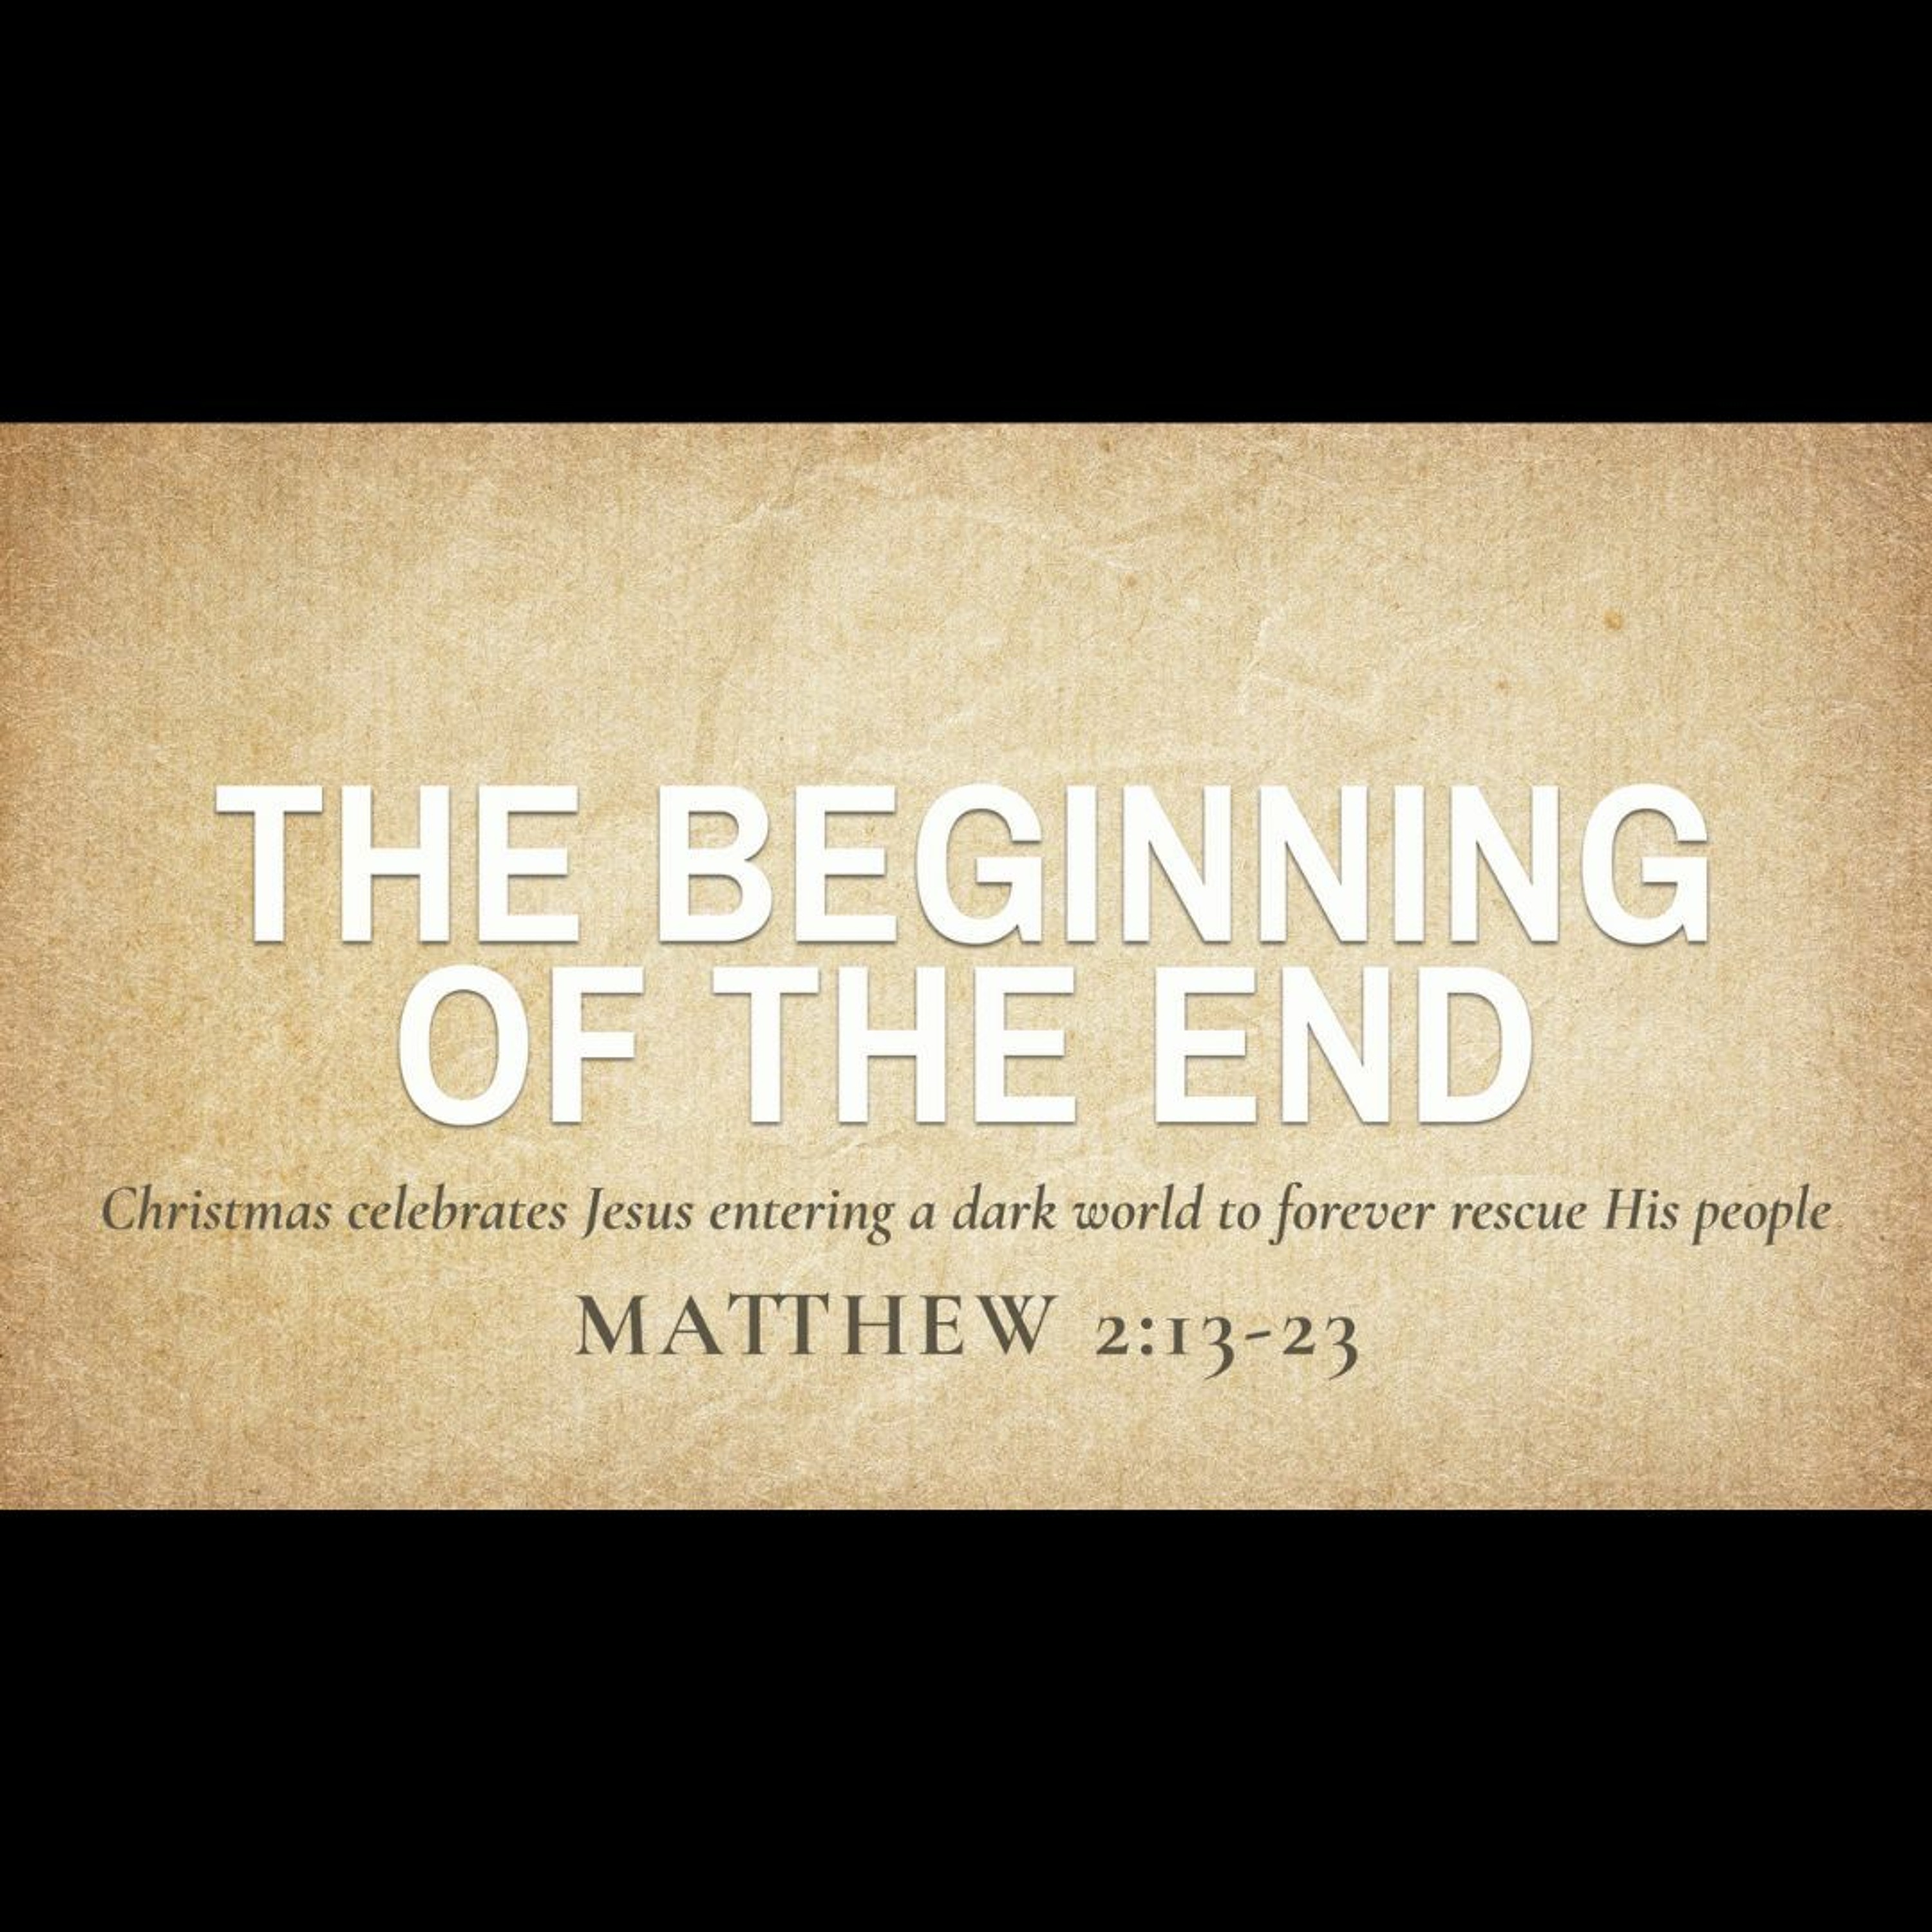 The Beginning of the End (Matthew 2:13-23)